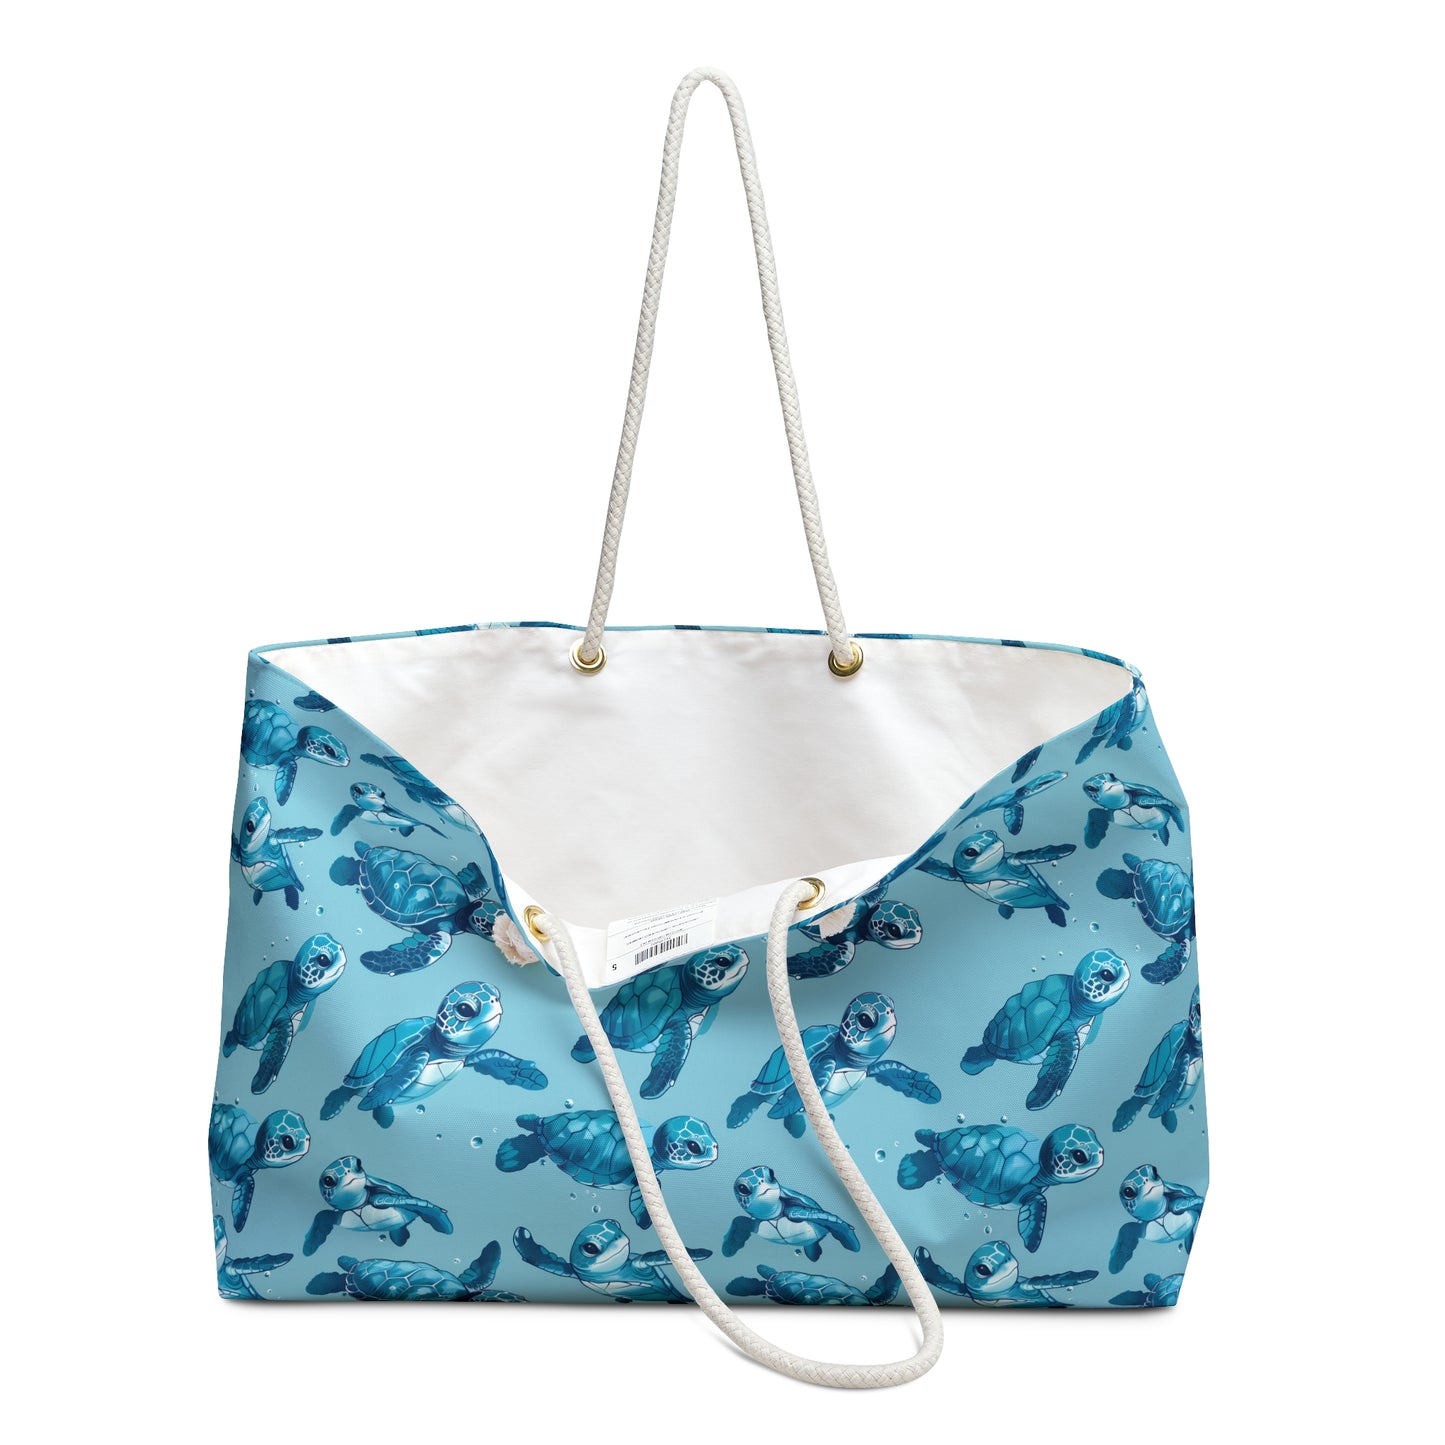 Deluxe Tote & Beach Bag with Cute Baby Sea Turtles (24" × 13" x 5.5")